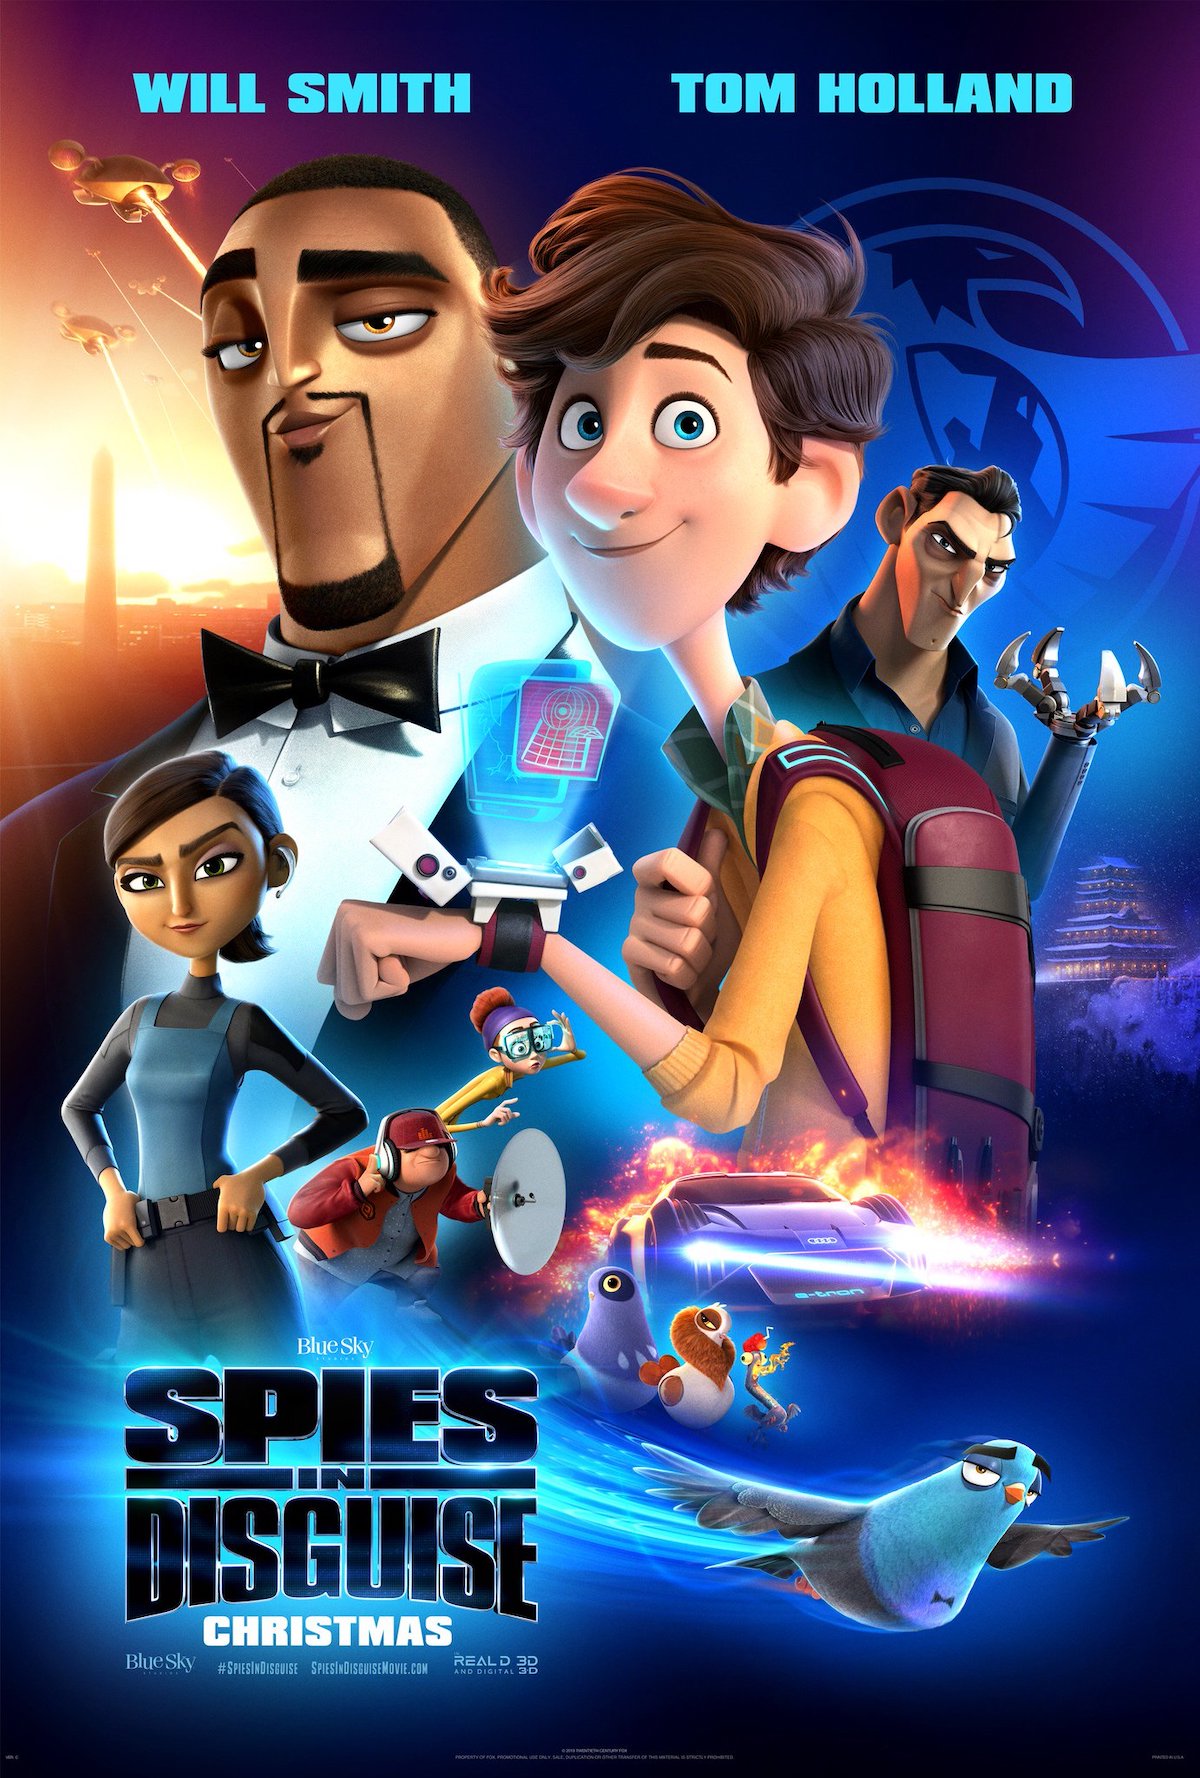 [TRAILER] 'Spies in Disguise' "Super Secret Trailer" Debuts Rotoscopers